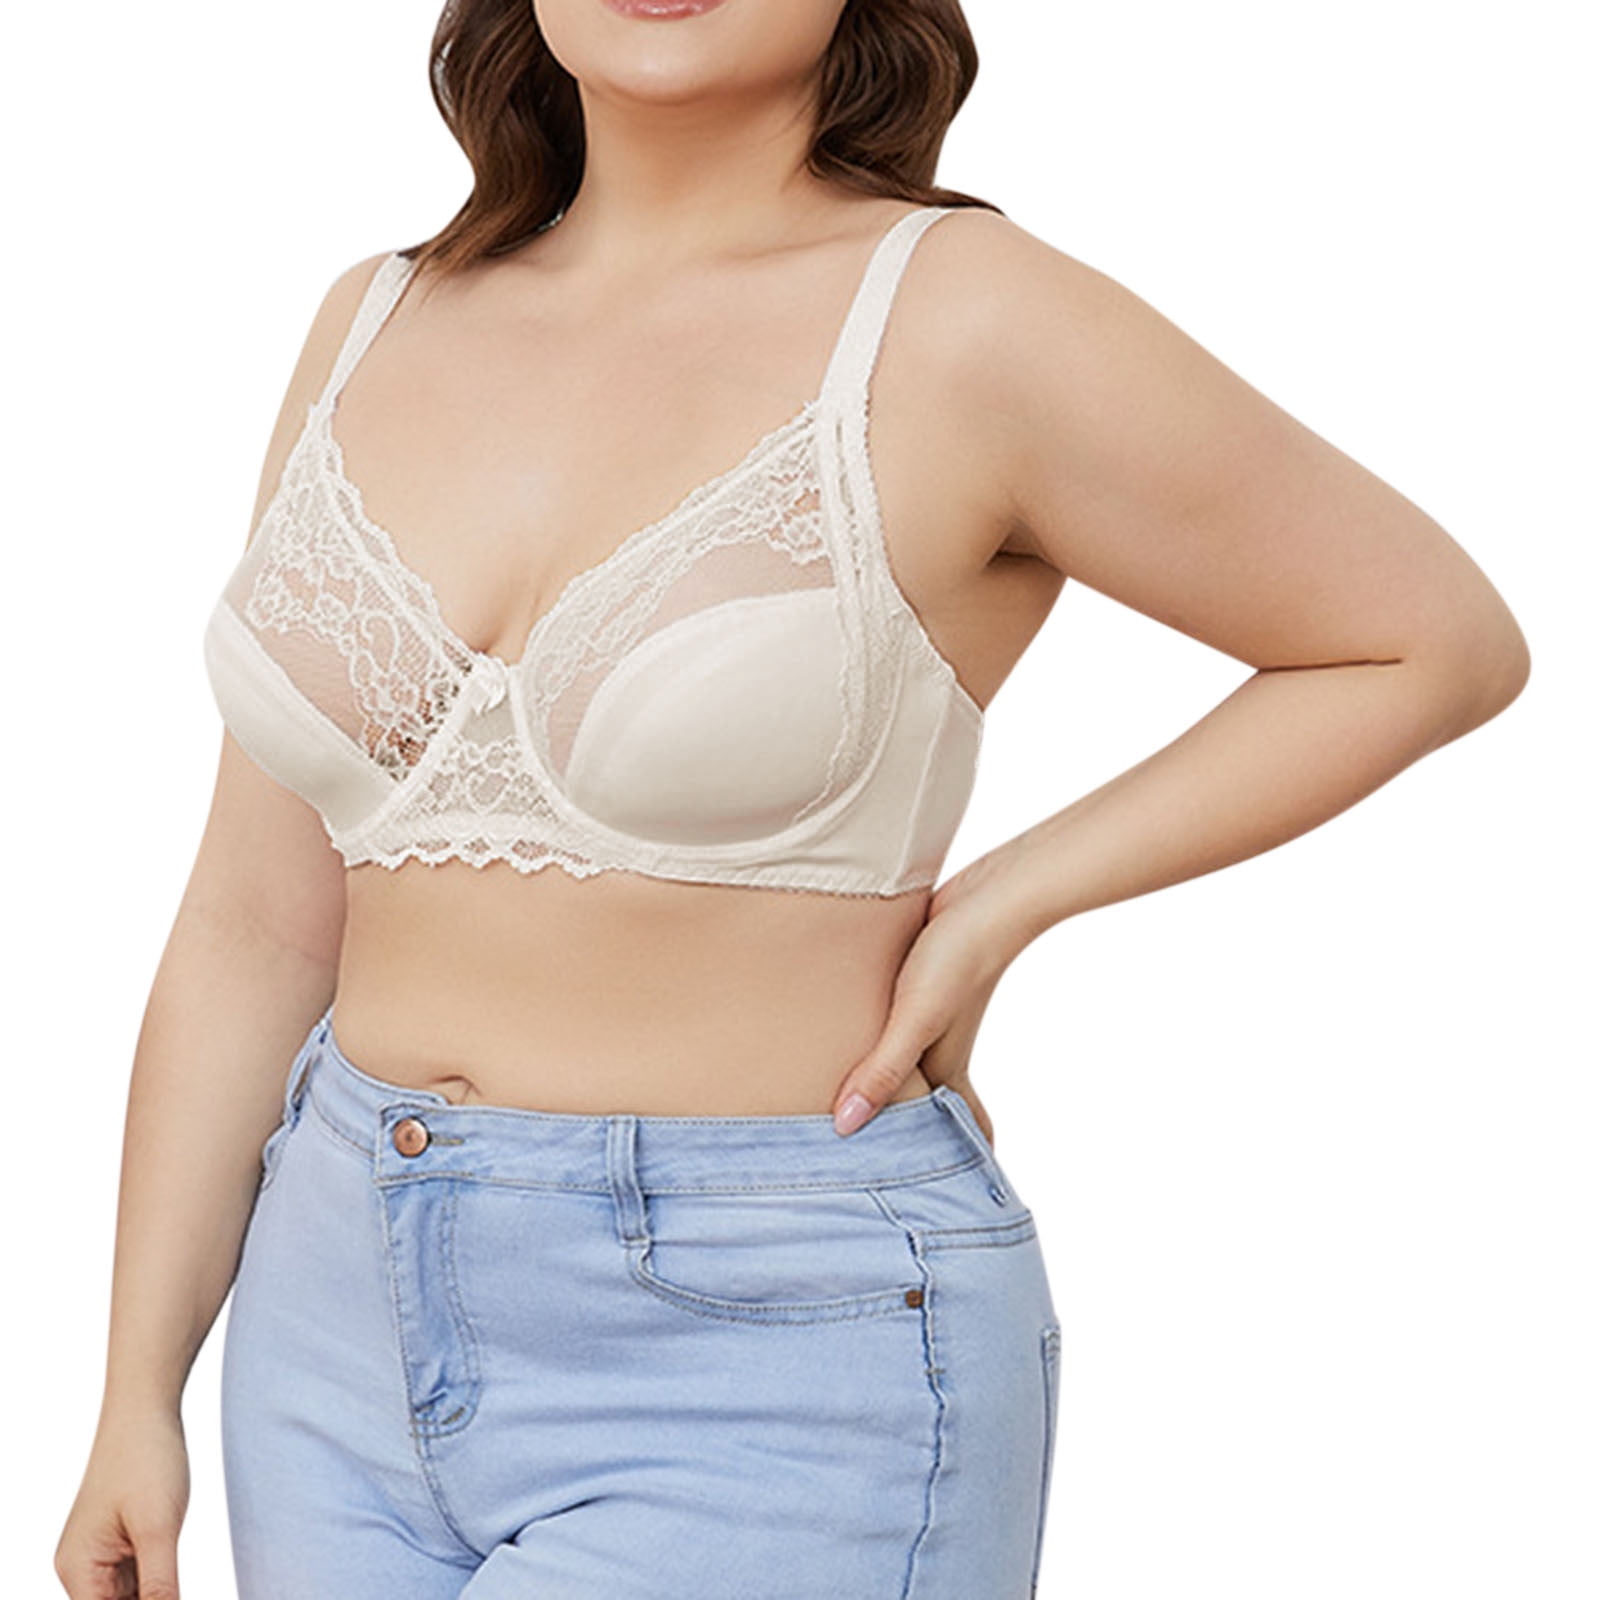 LEEy-World Plus Size Lingerie Compression Wirefree High Support Bra for  Women S to Plus Size Everyday Wear, Exercise and Offers Back Support  Beige,85